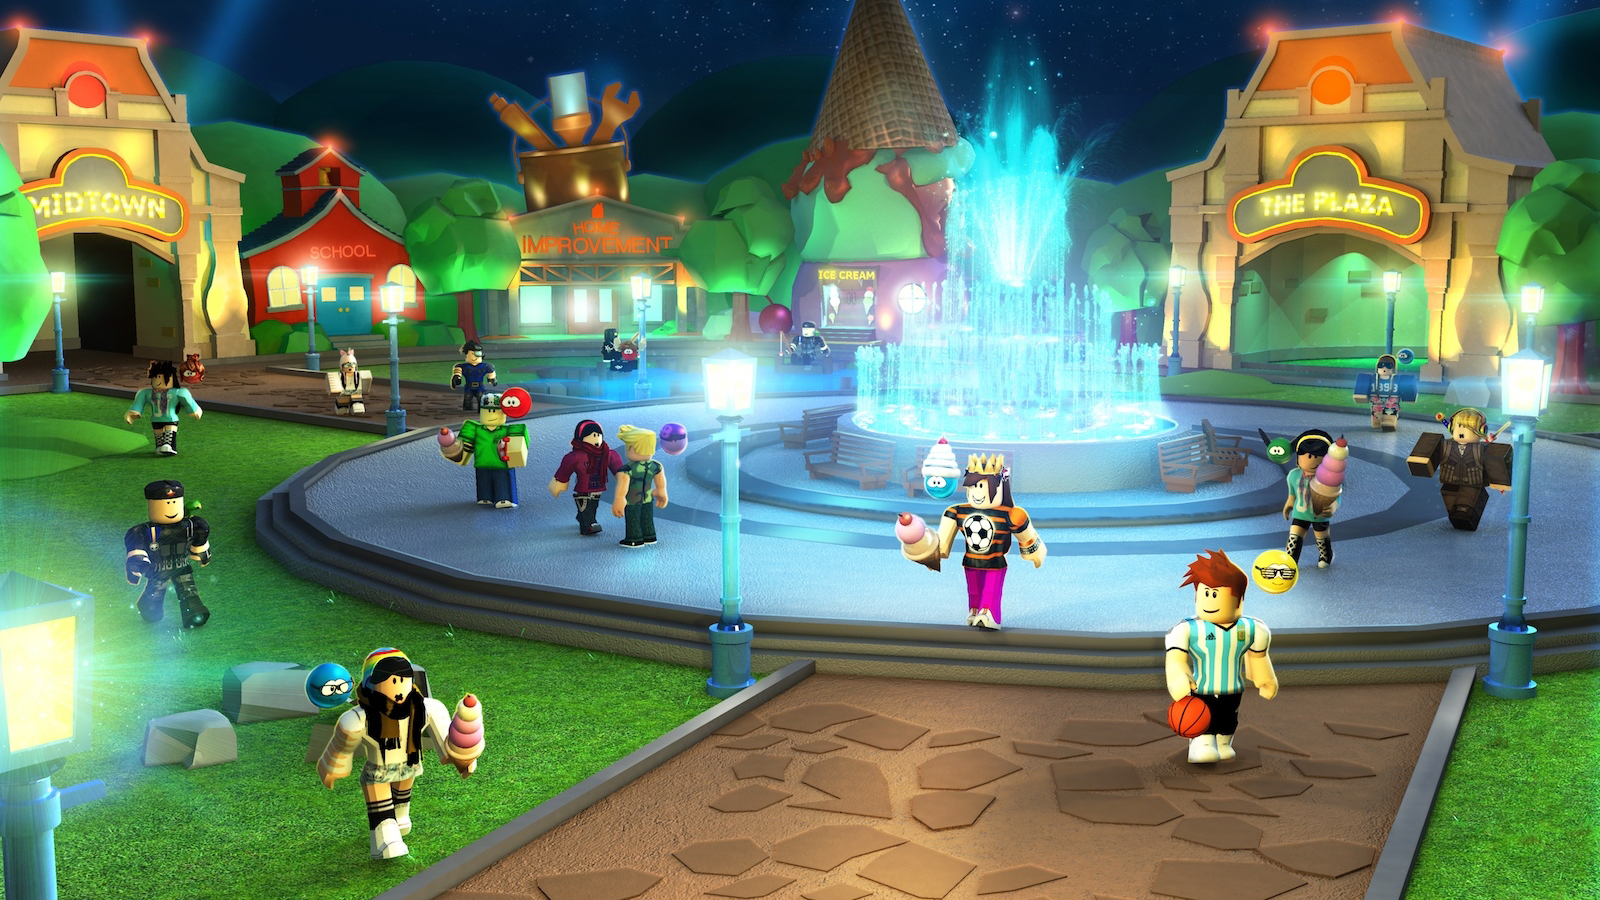 Roblox and Underage Gambling at the Center of New Lawsuit 